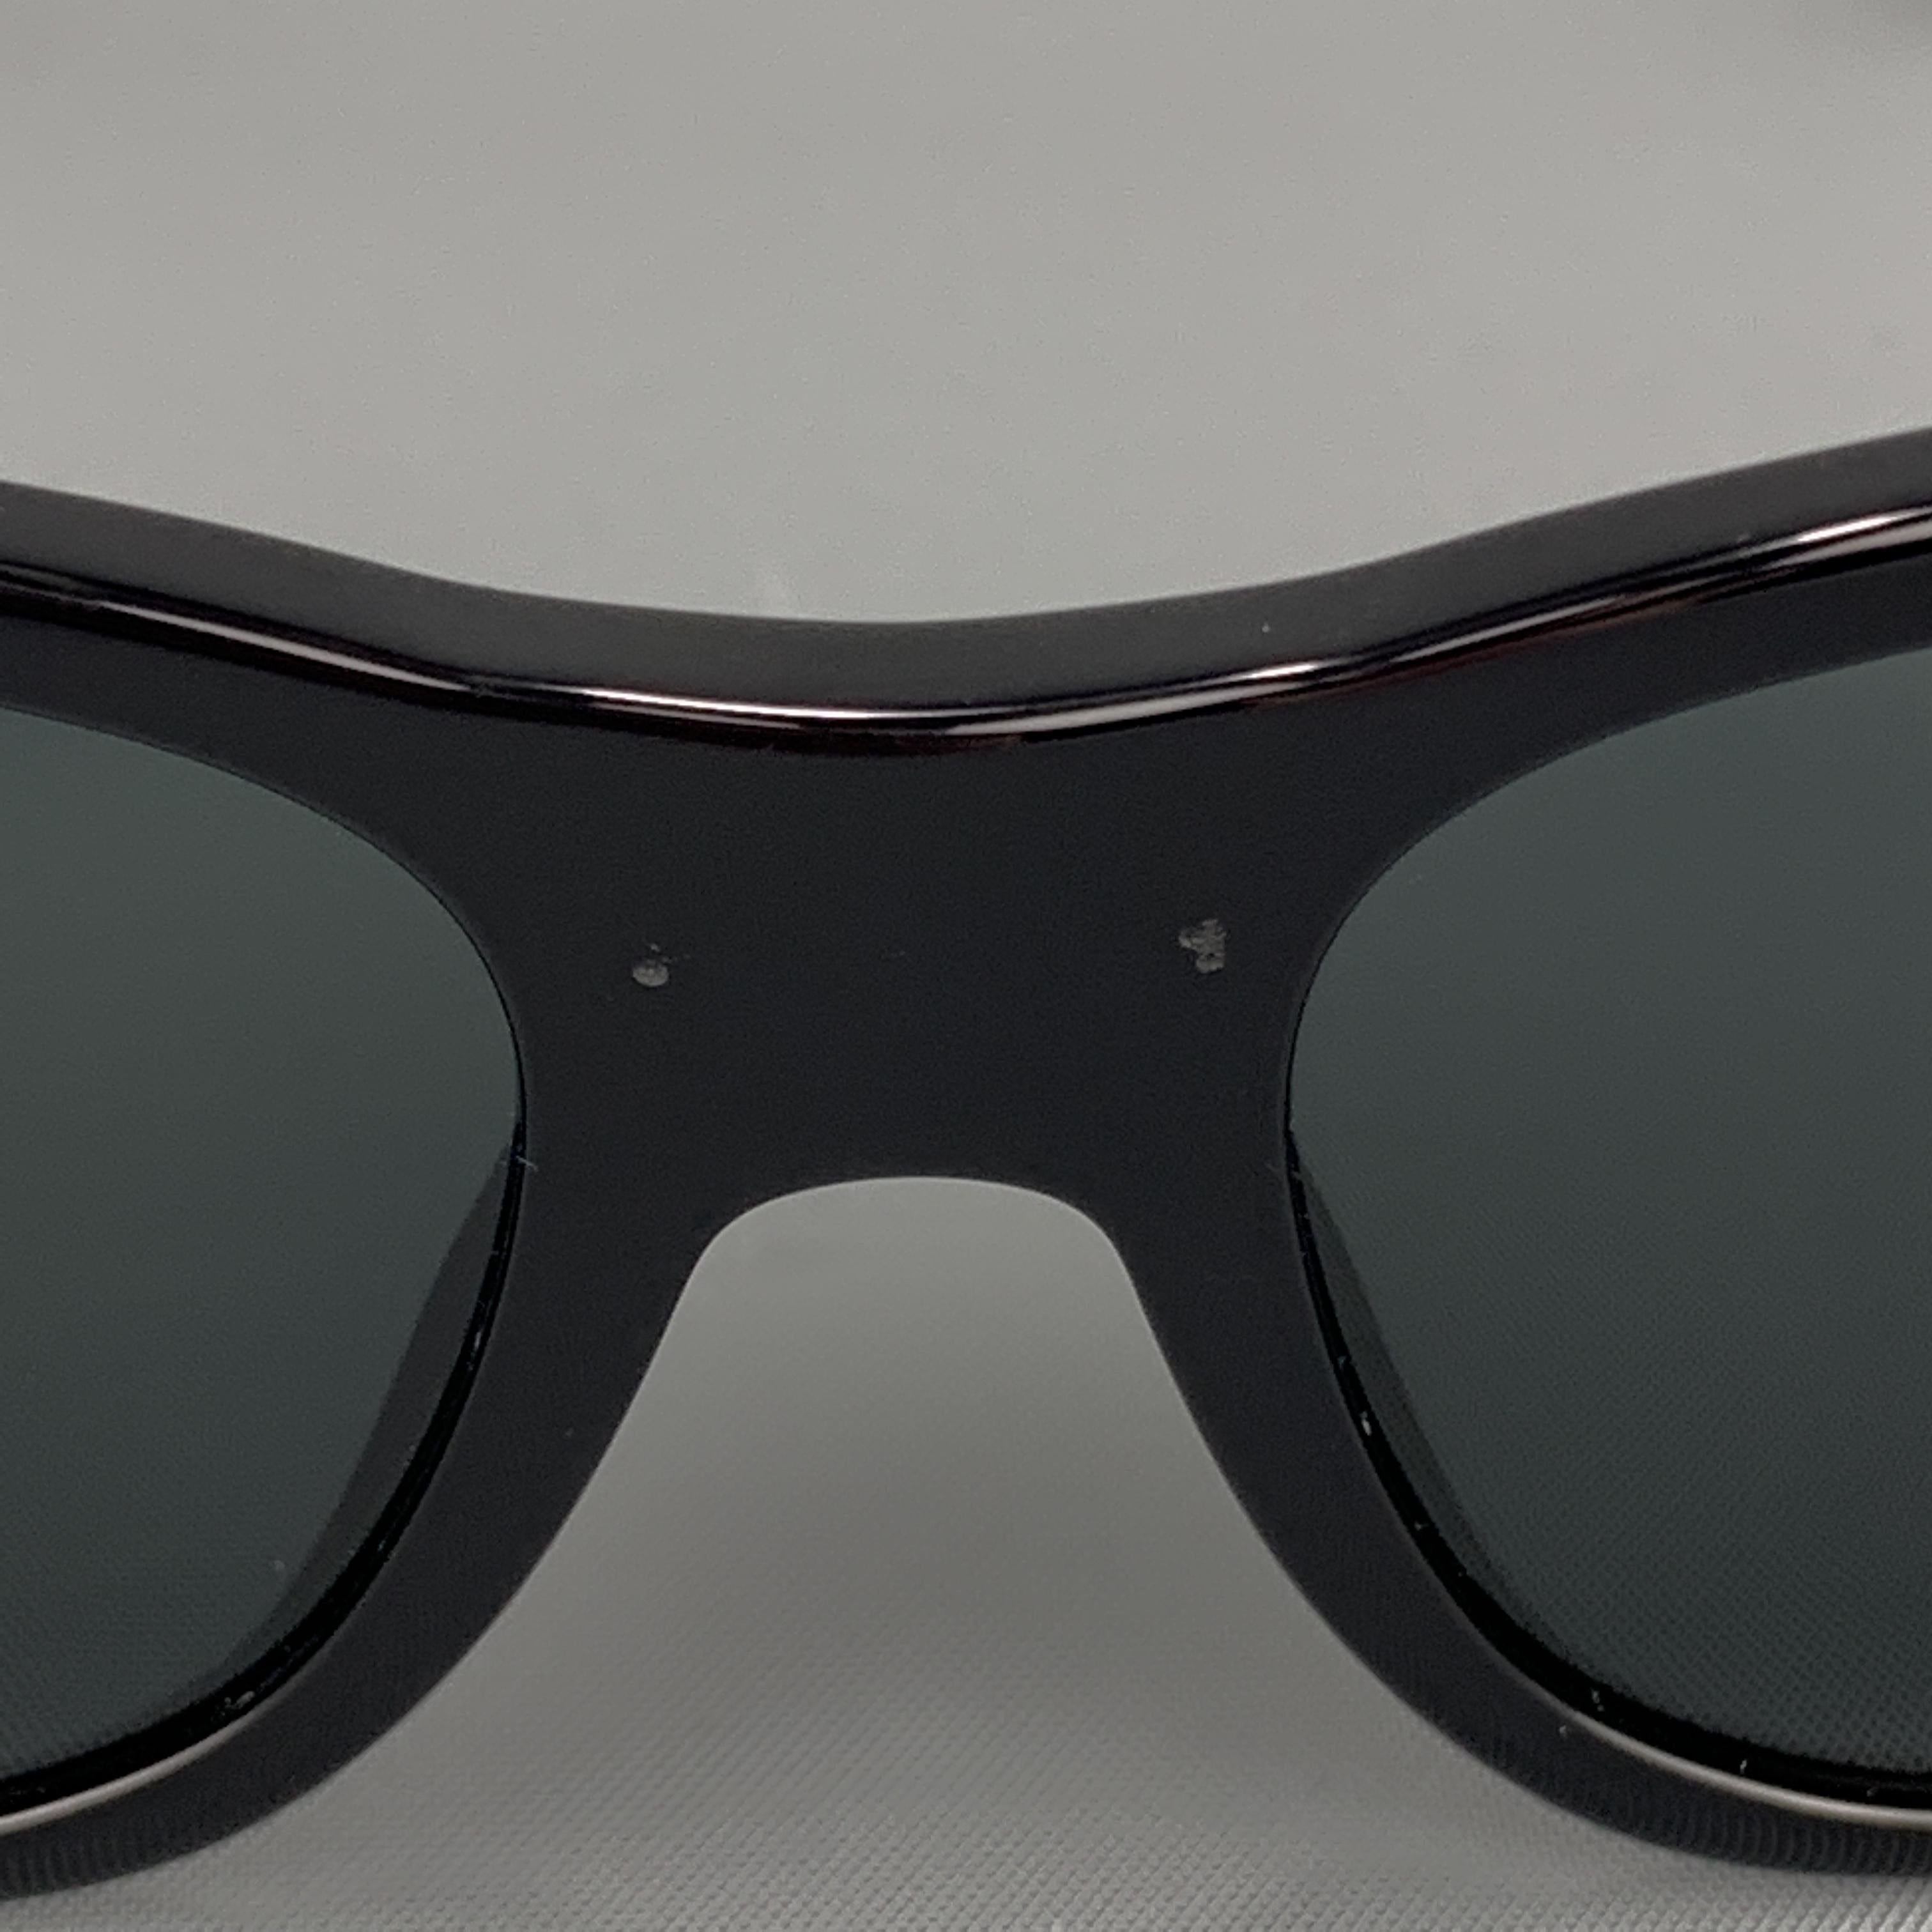 VERSACE sunglasses come in black acetate with thick arms and gold tone Medusa embellishments. Scuffs on center front. As-is. With case. Made in Italy.
 
Very Good Pre-Owned Condition.
Marked: Mod. 4275
 
Measurements:
 
Length: 15 cm.
Height: 5 cm.